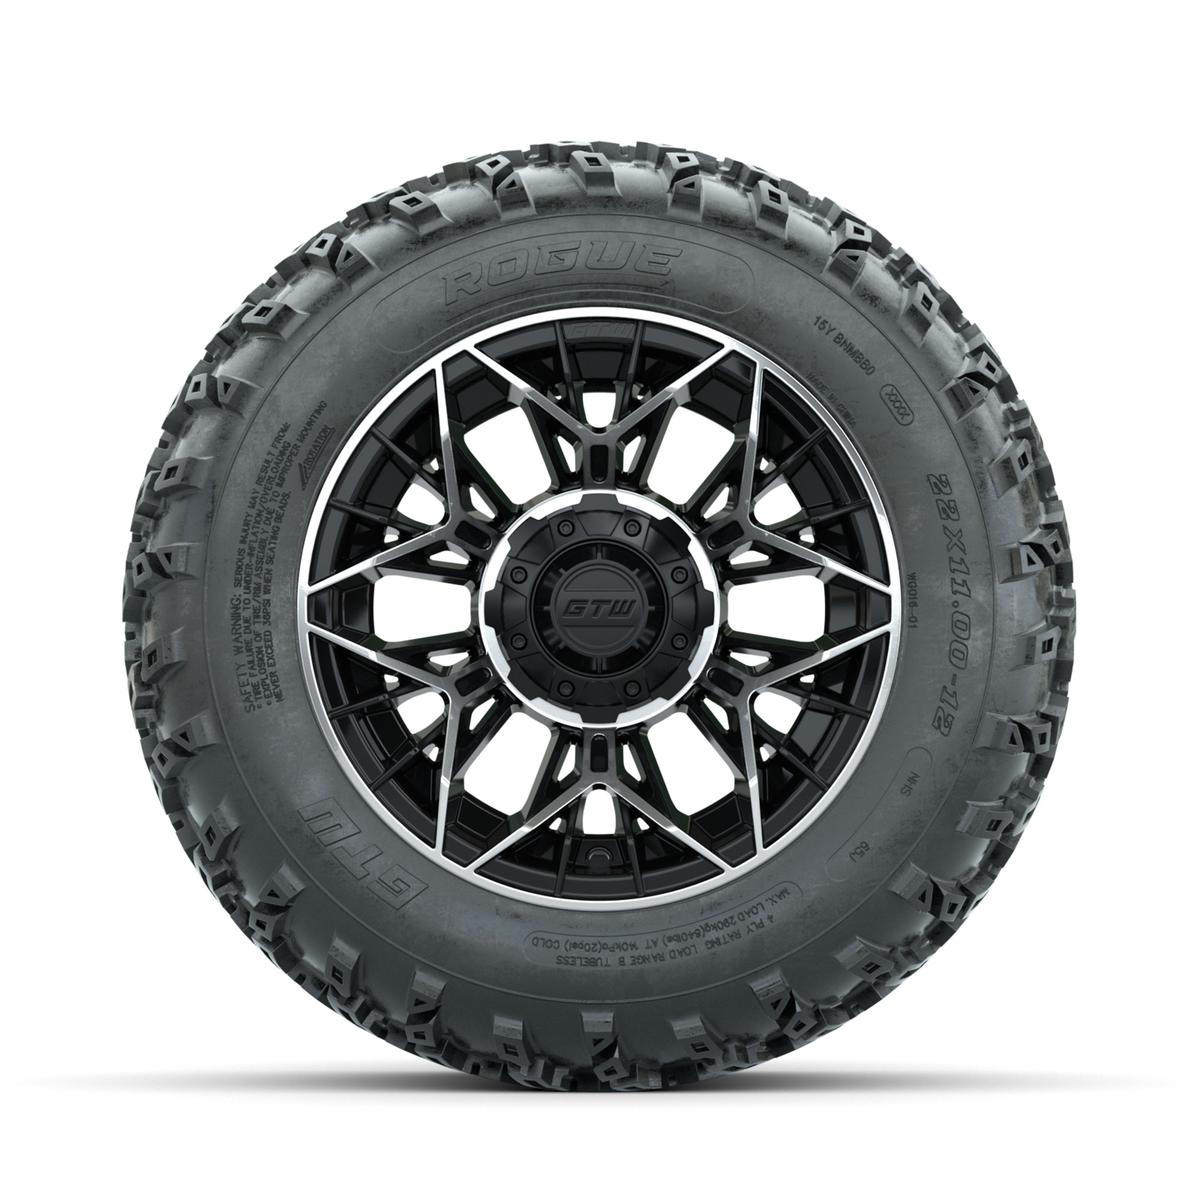 GTW Stellar Machined/Black 12 in Wheels with 22x11.00-12 Rogue All Terrain Tires – Full Set